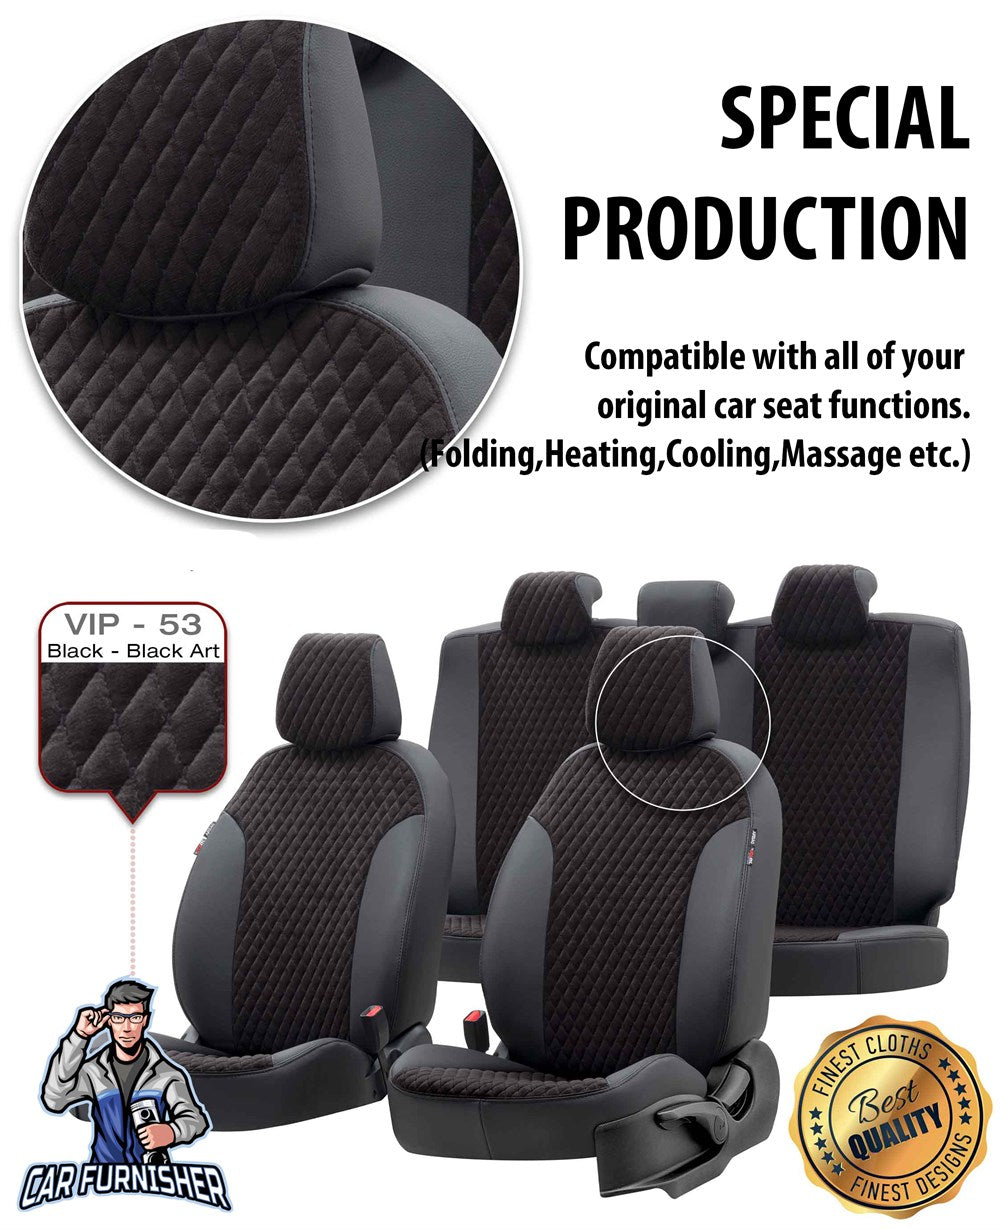 Daihatsu Terios Seat Covers Amsterdam Foal Feather Design Black Leather & Foal Feather